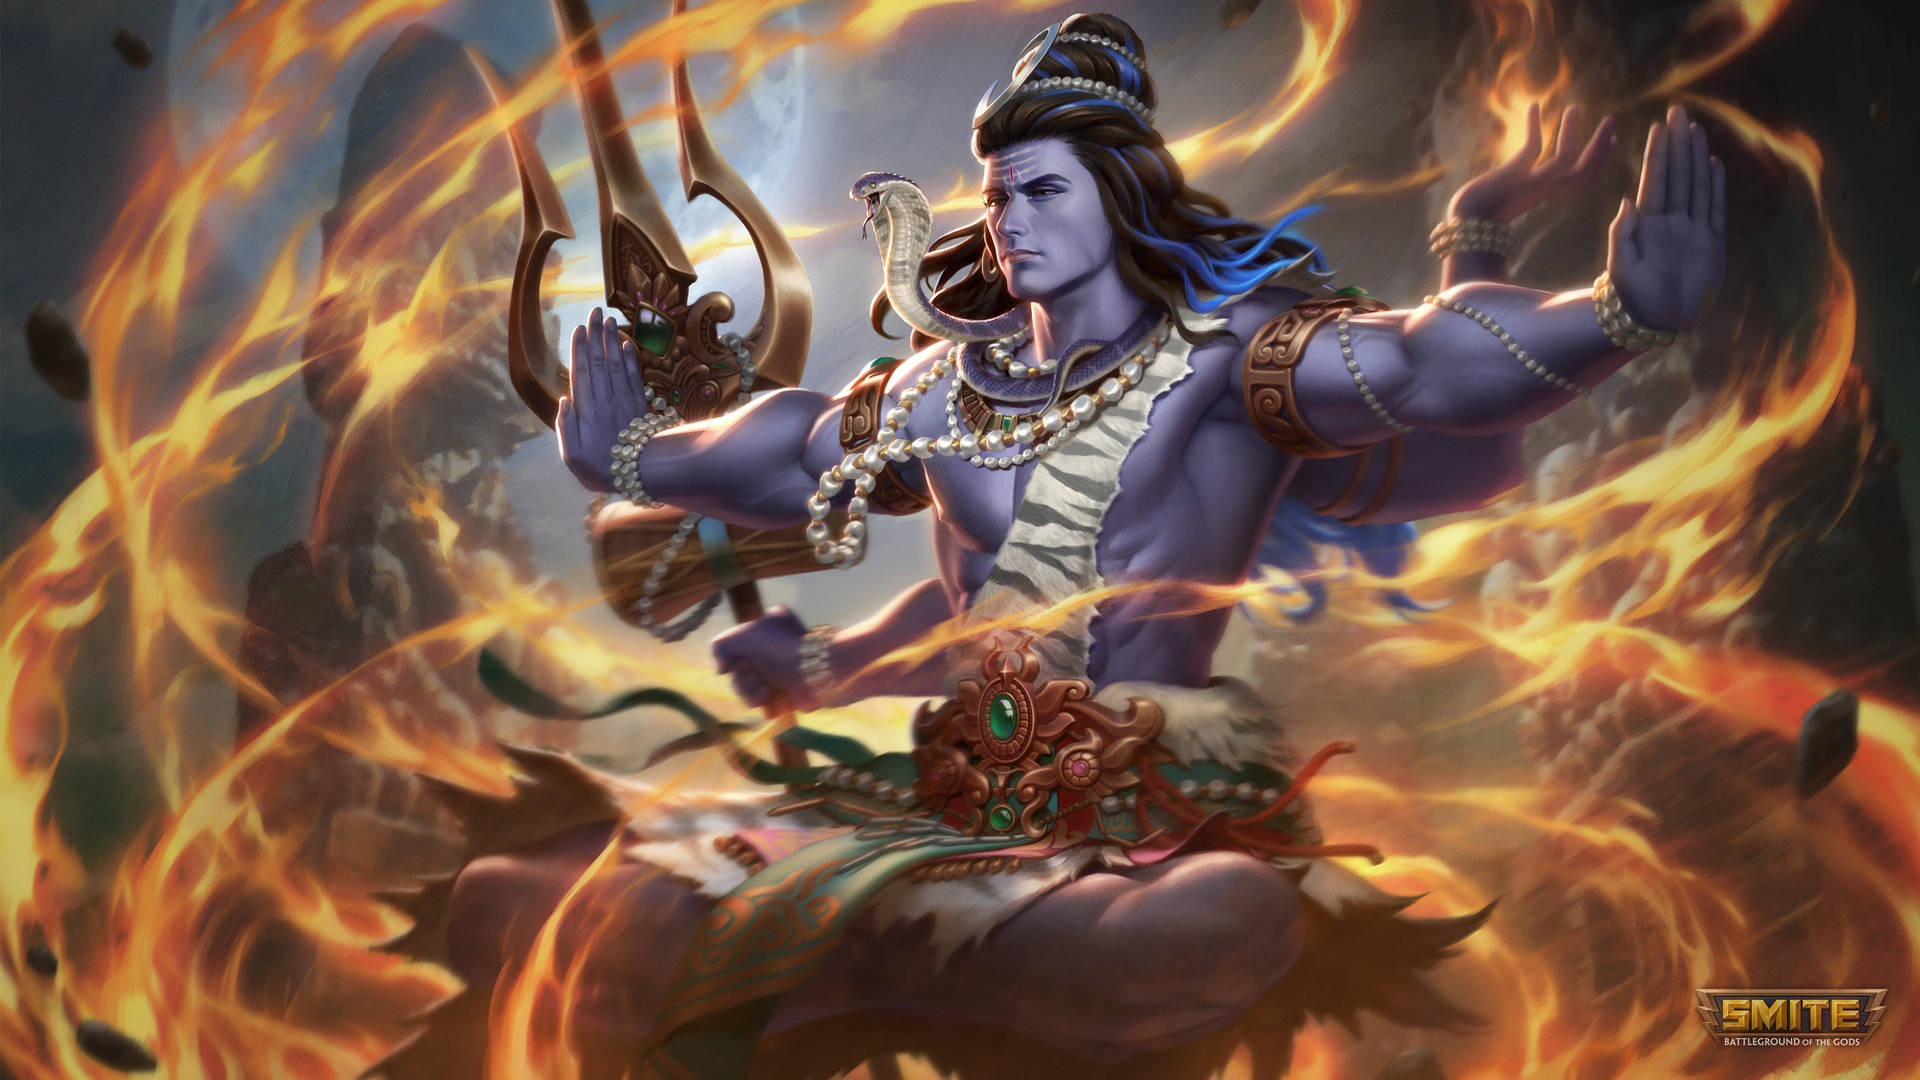 Lord Shiva 4k Surrounded By Flames